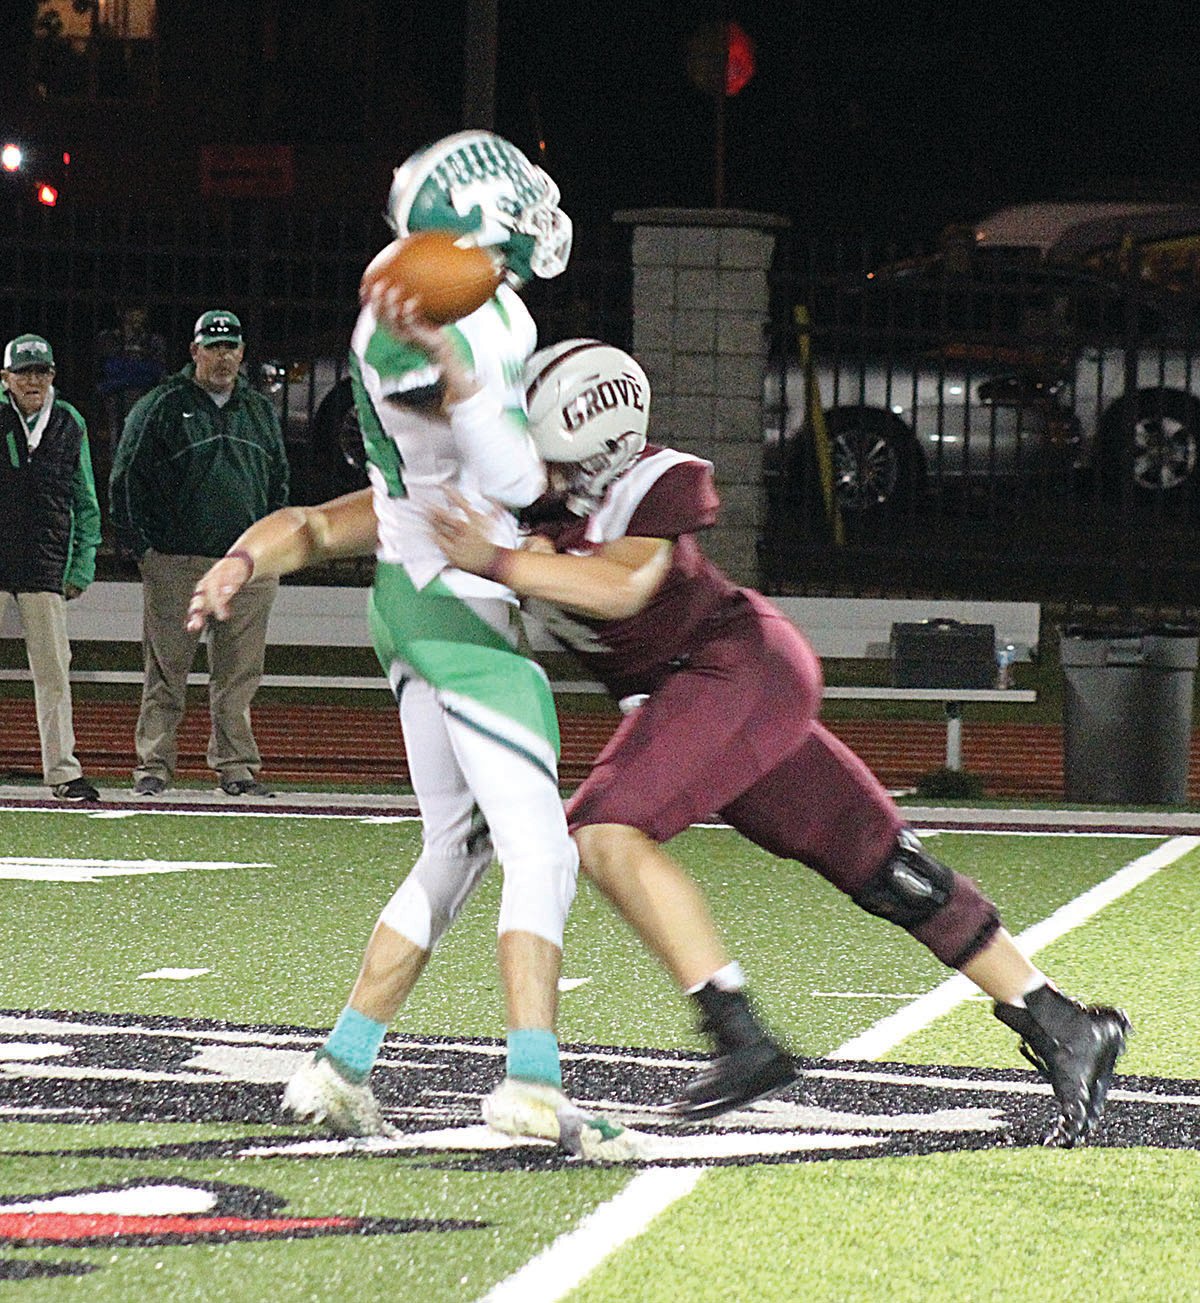 The Panthers’ Colton Allen hits a Thayer player on an attempted pass after a reverse at the end of the game.